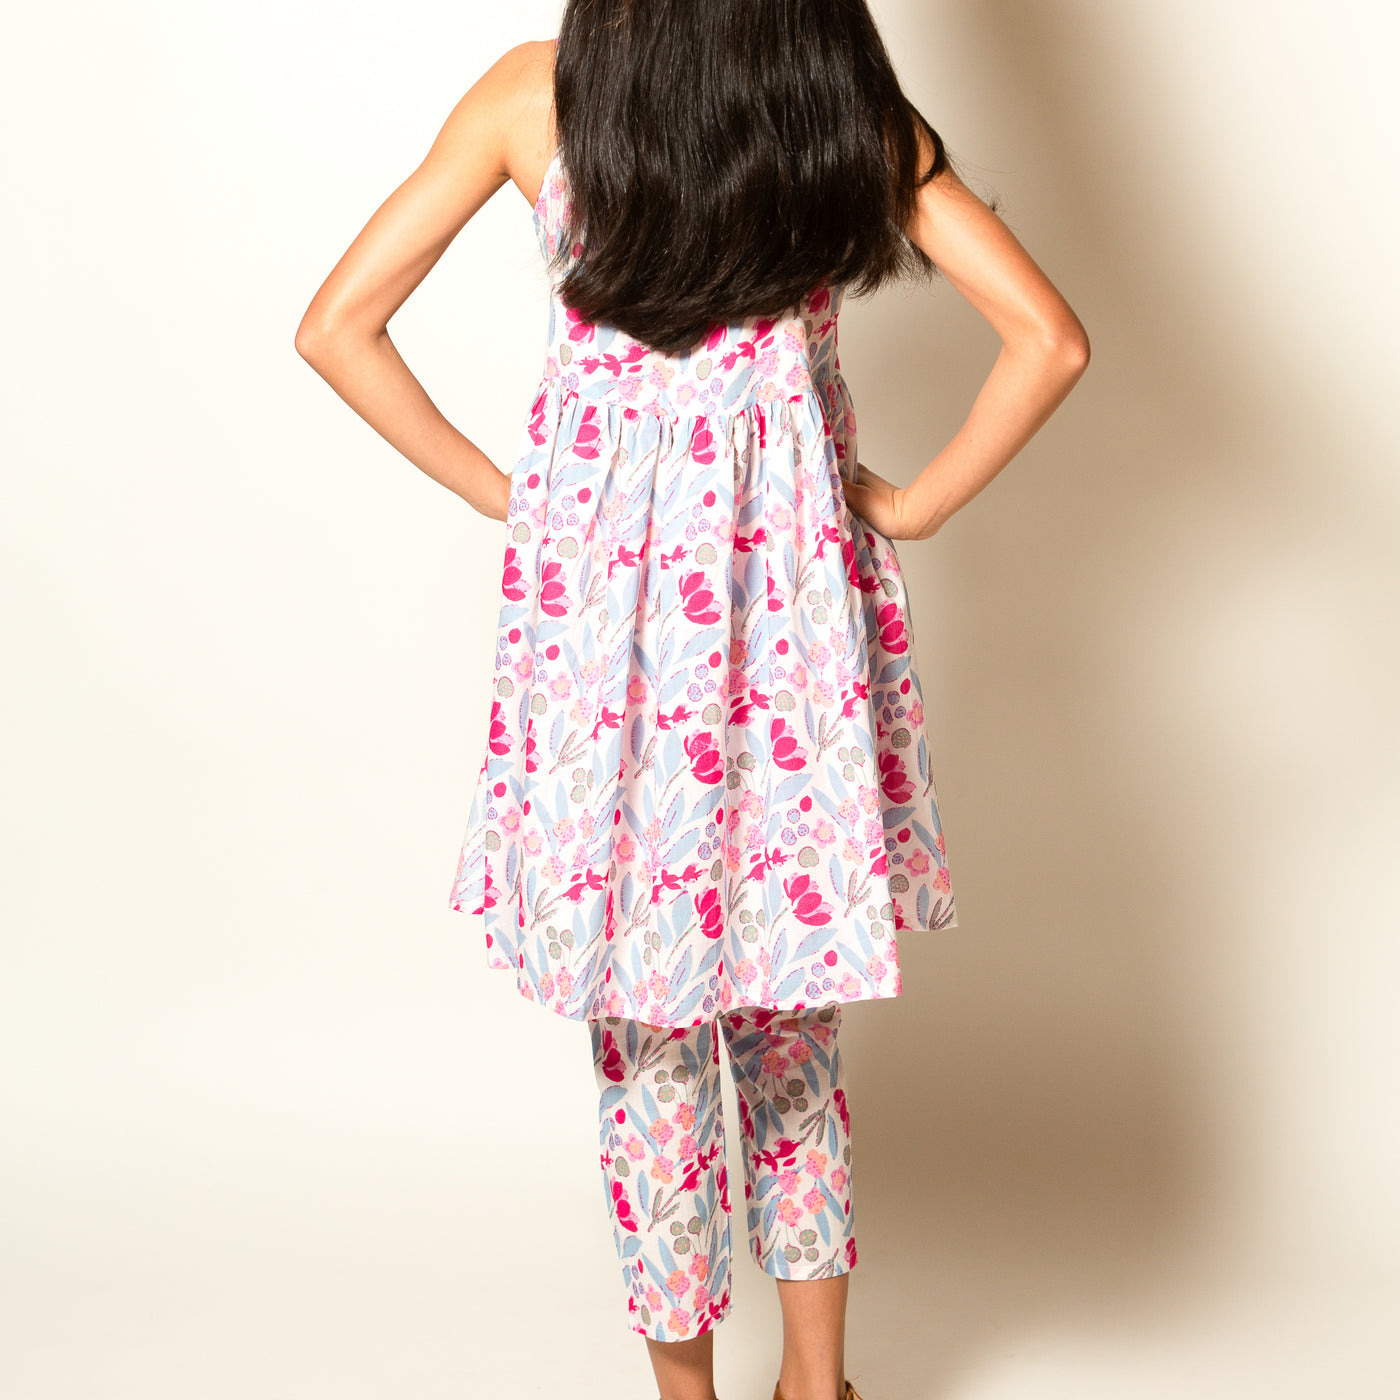 Mili - Girls Blue and Pink Floral Print Cotton Co-ord Set